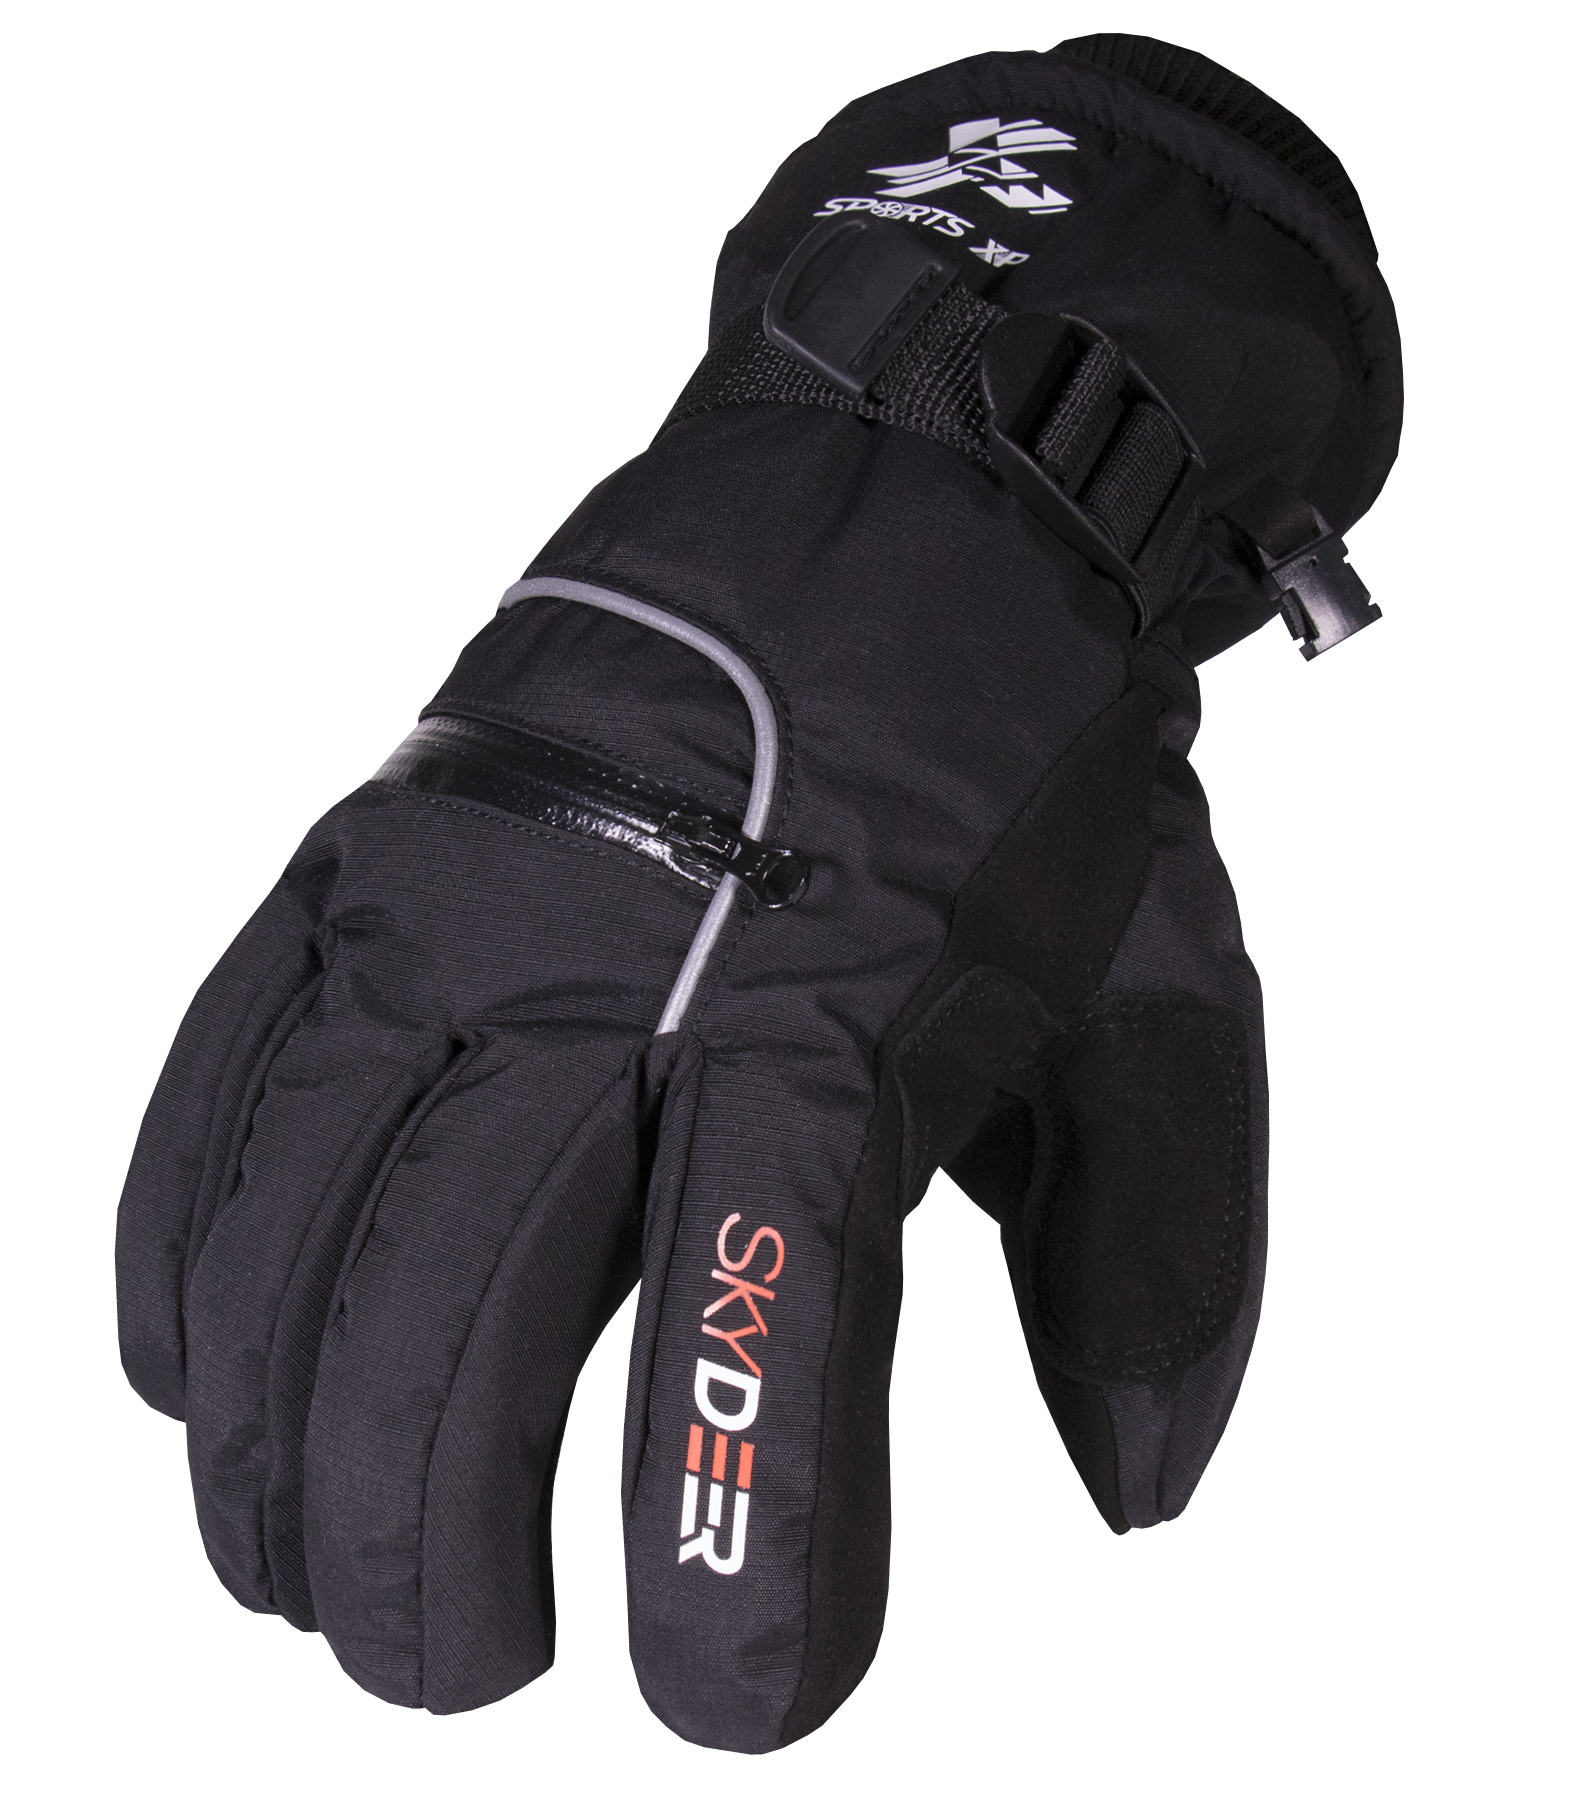 SKYDEER Armprotec Synthetic Leather WorkPRO Glove SD8809(M) (3